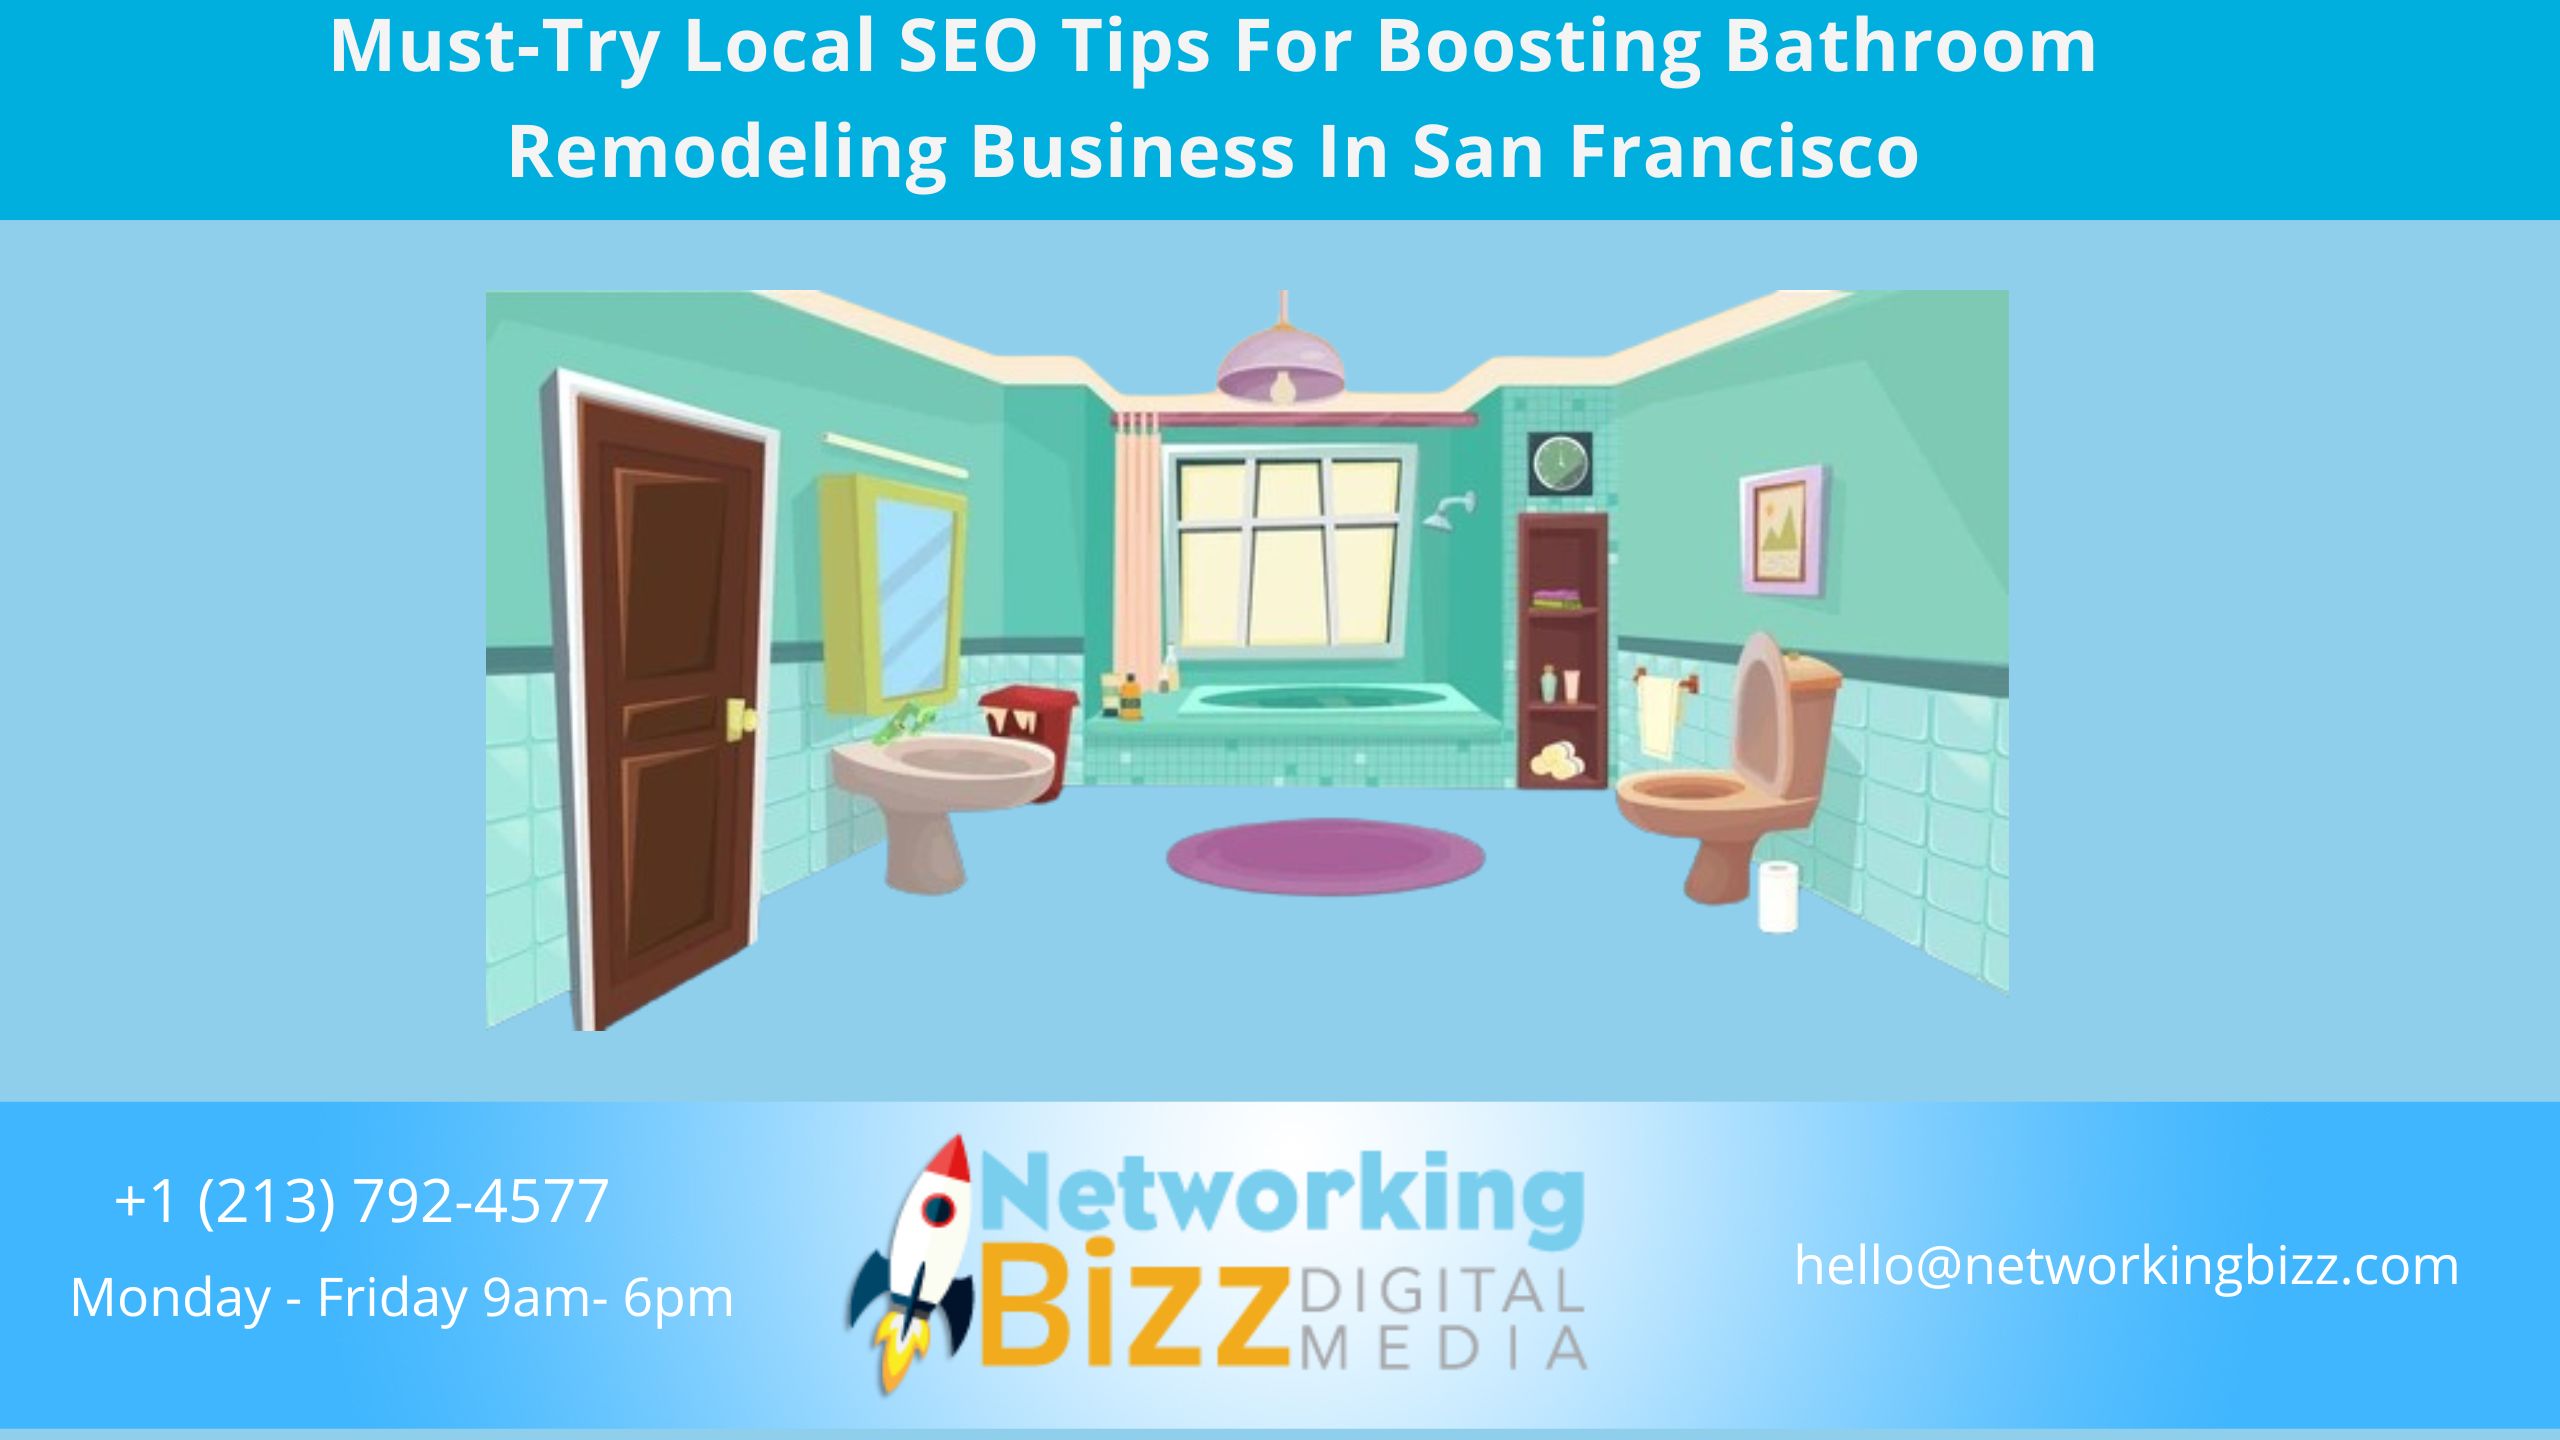 Must-Try Local SEO Tips For Boosting Bathroom Remodeling Business In San Francisco 